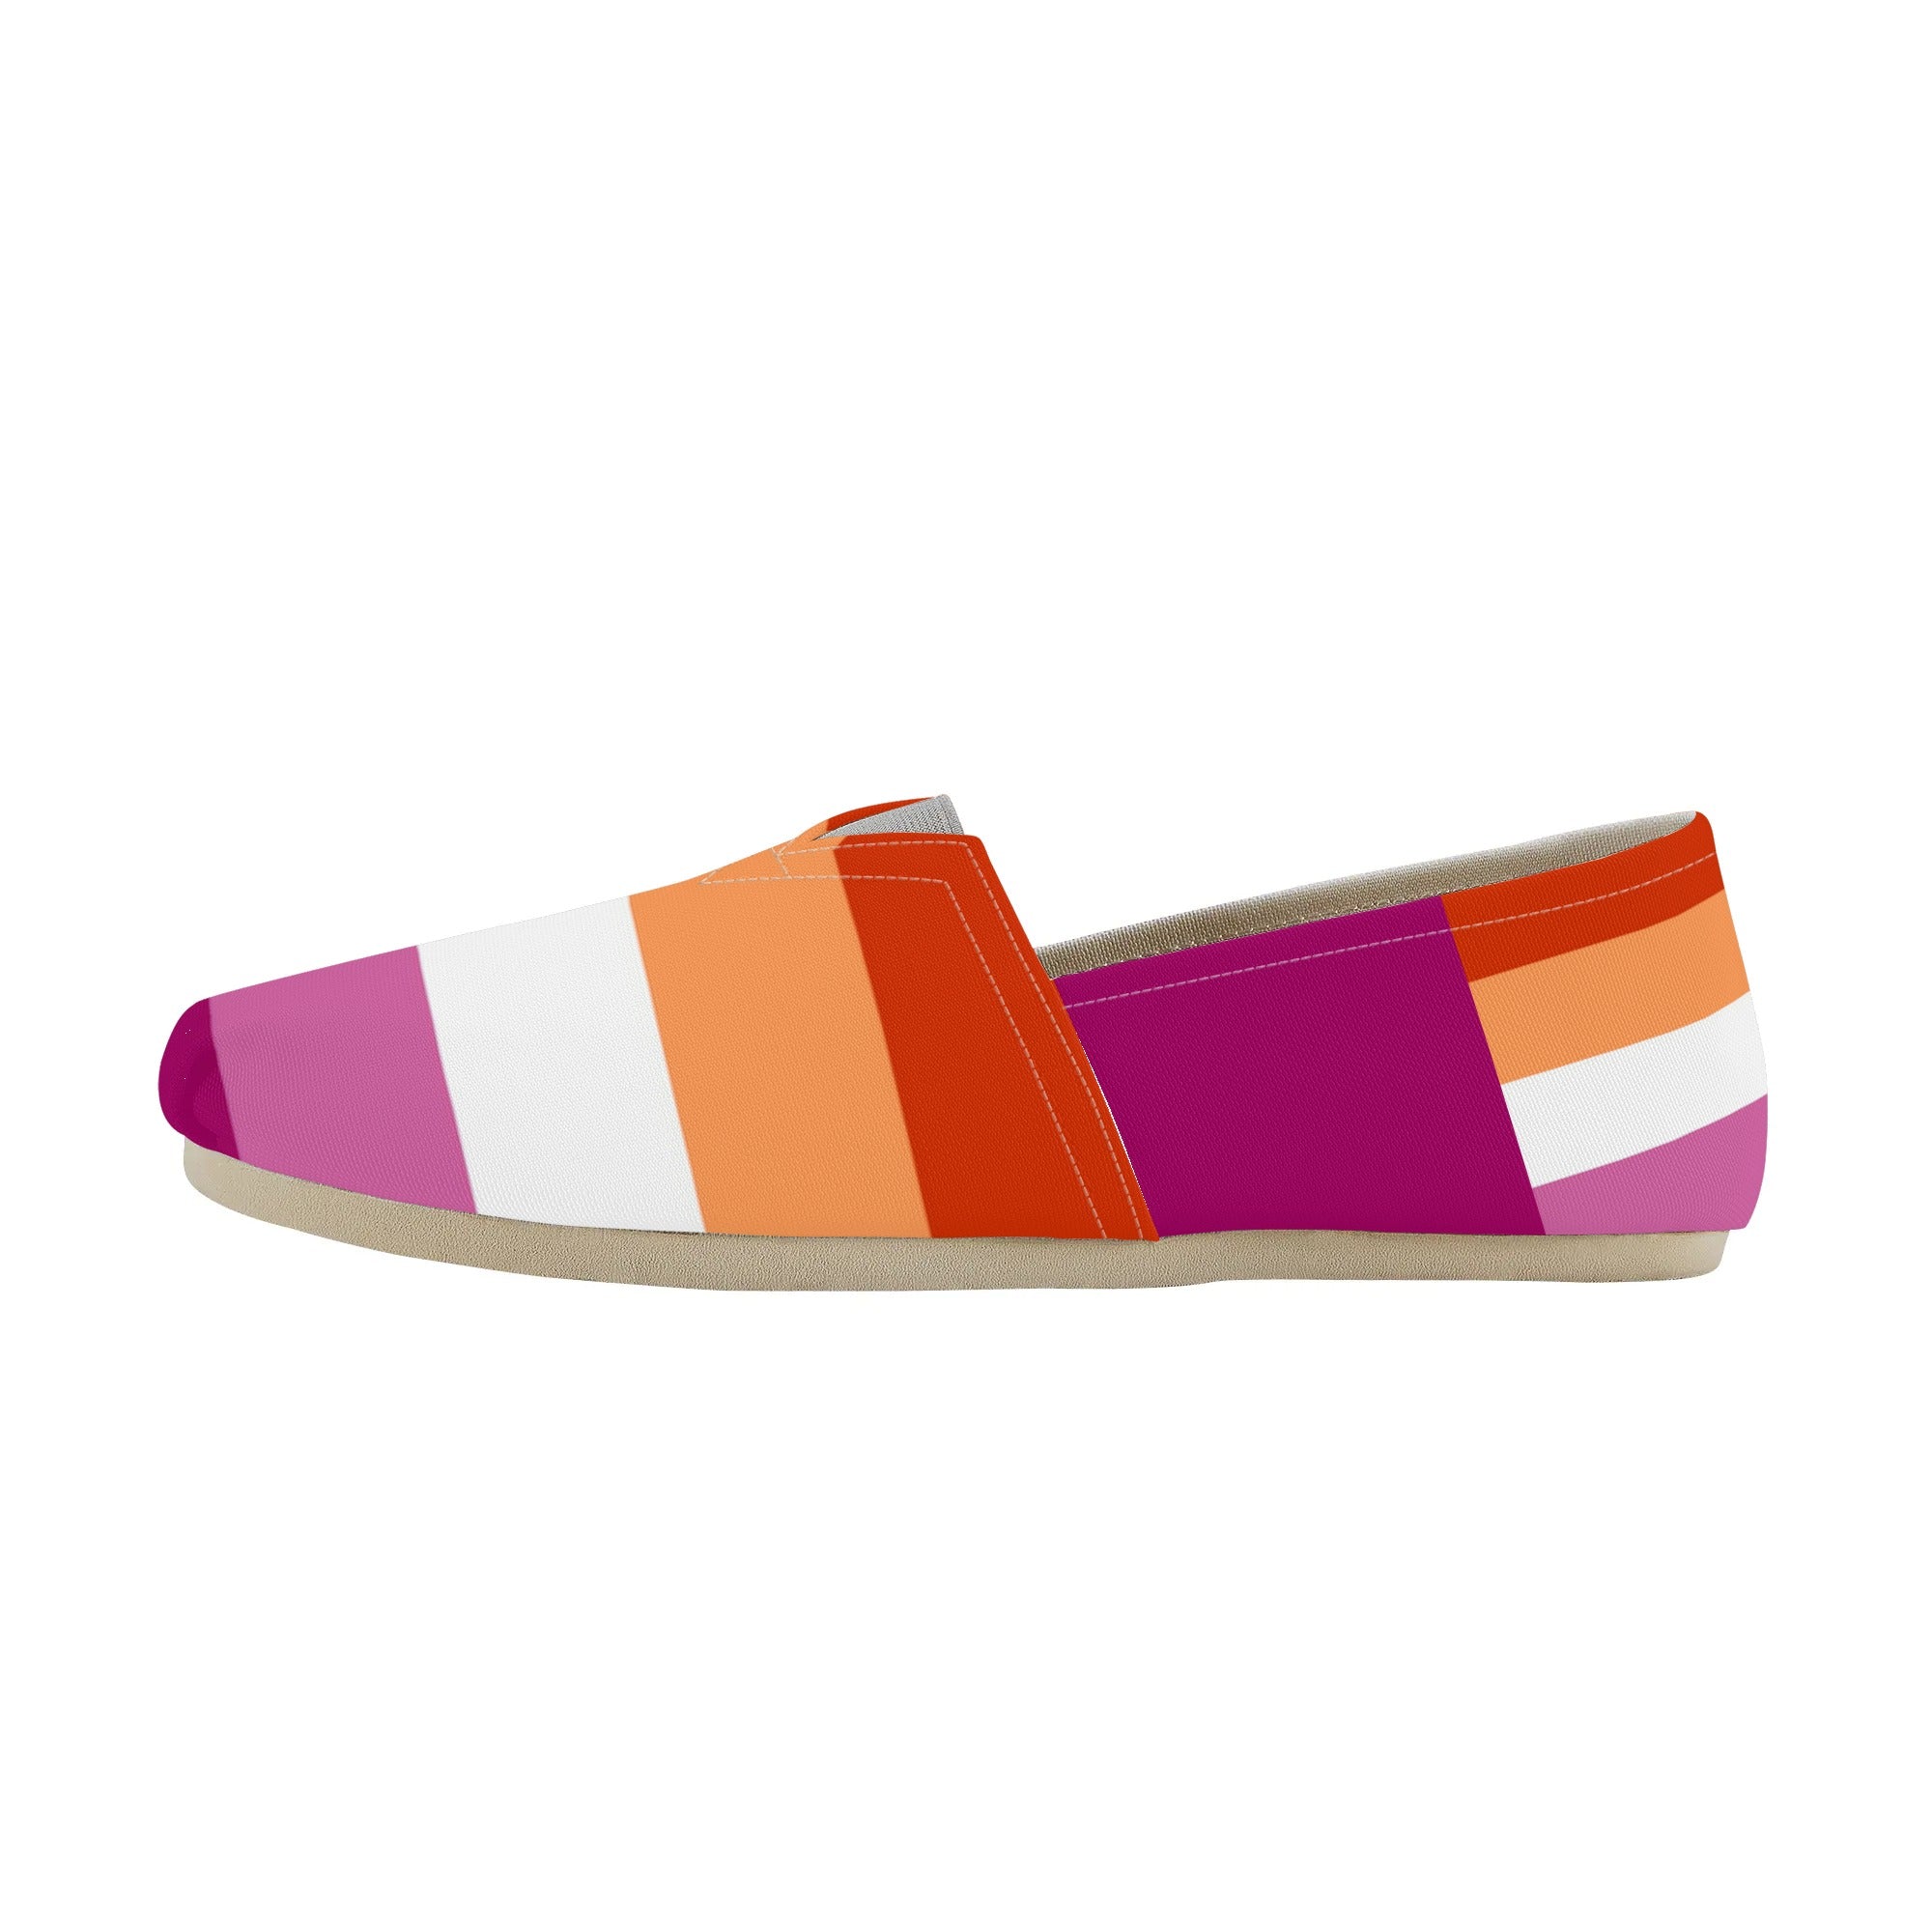 Lesbian Pride Tom Style Canvas Shoes